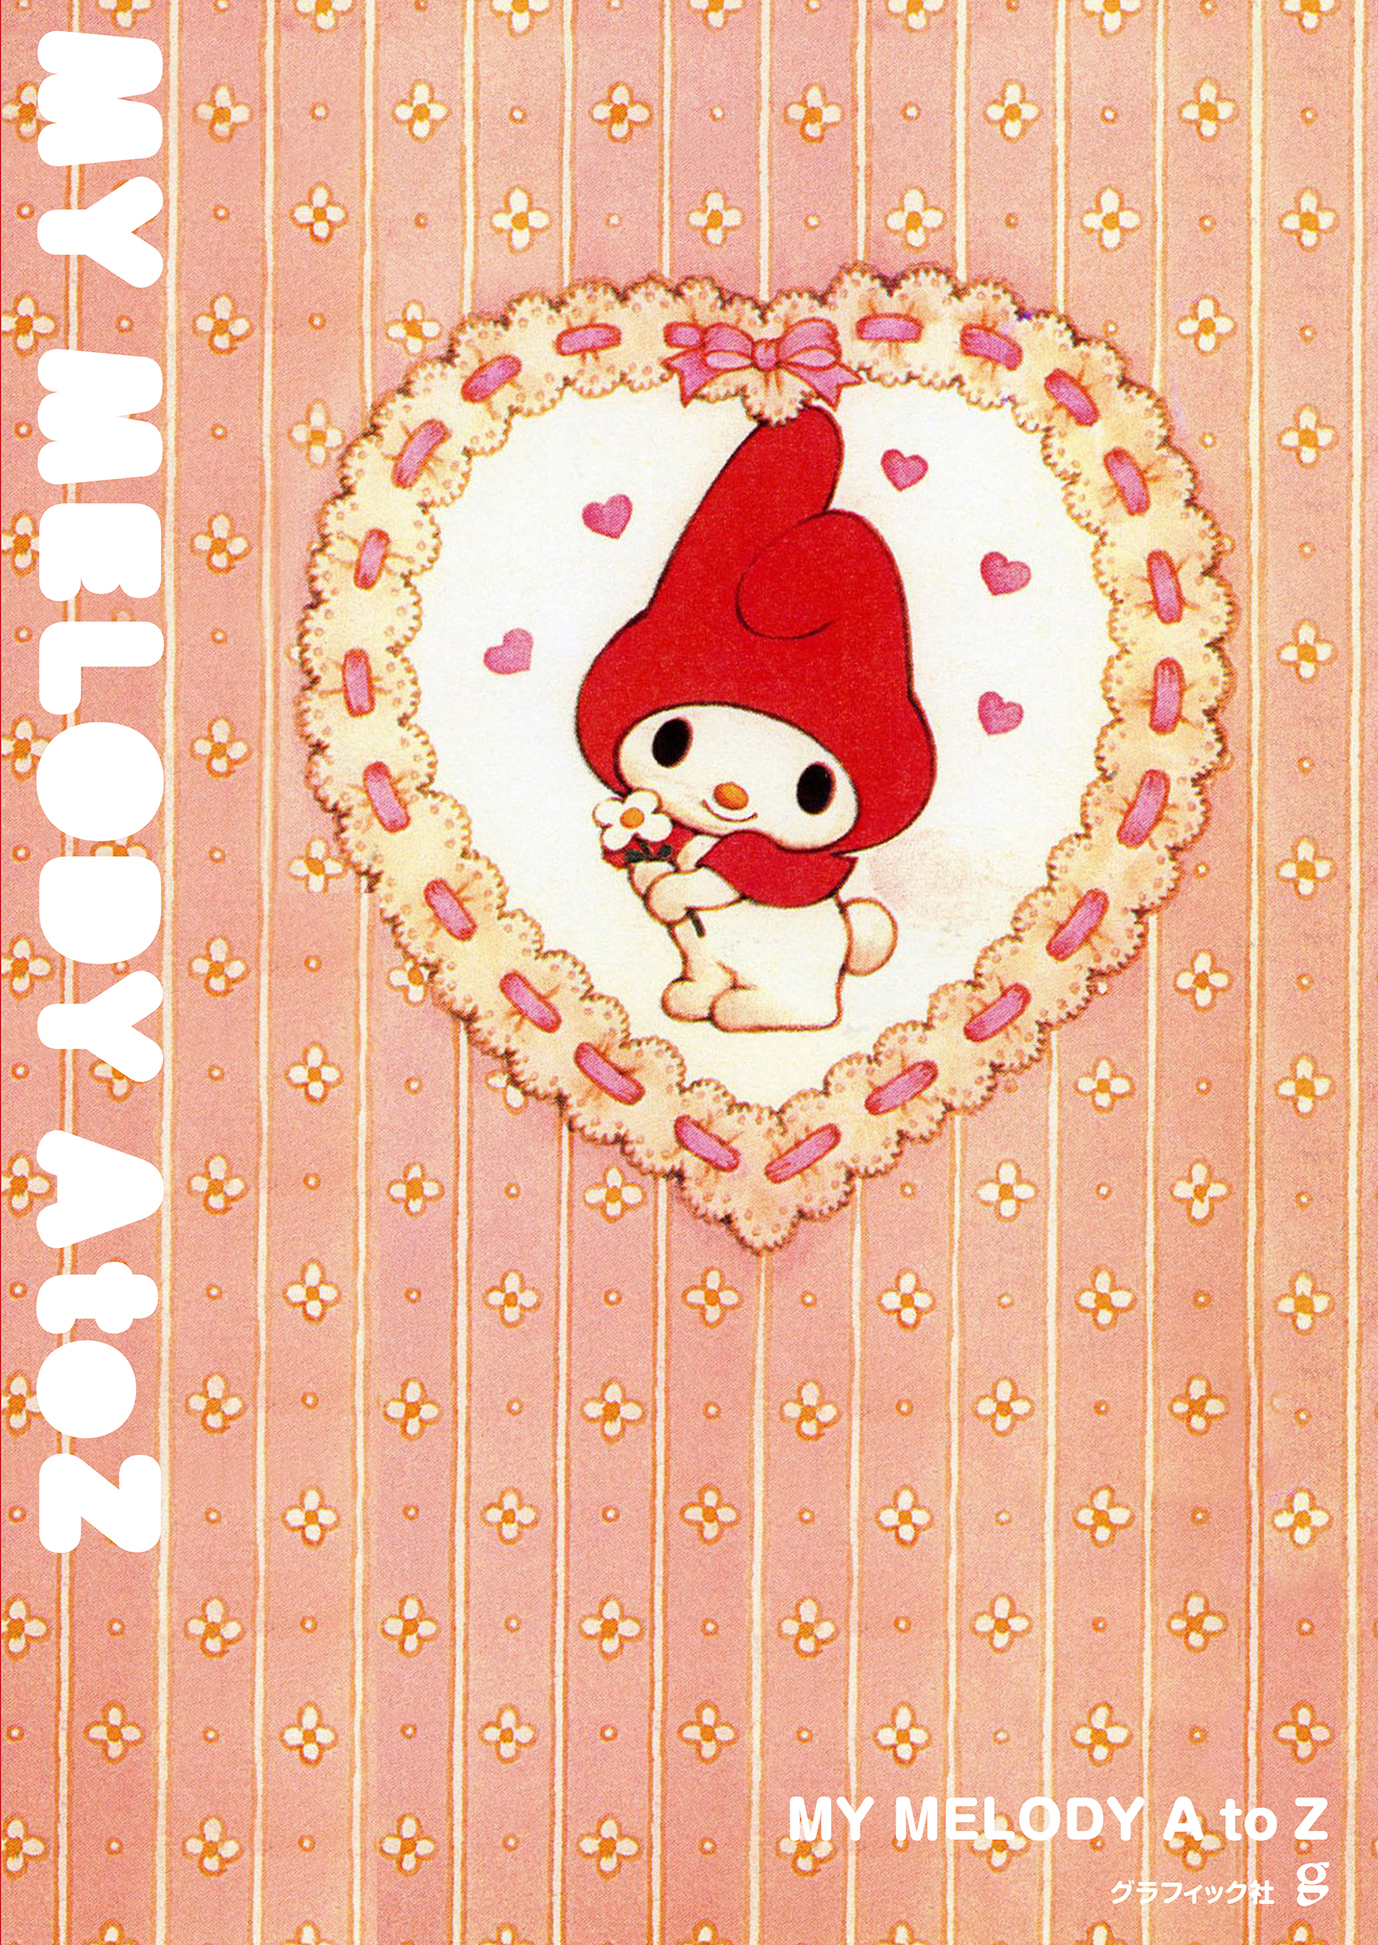 MY MELODY A to Zの商品画像